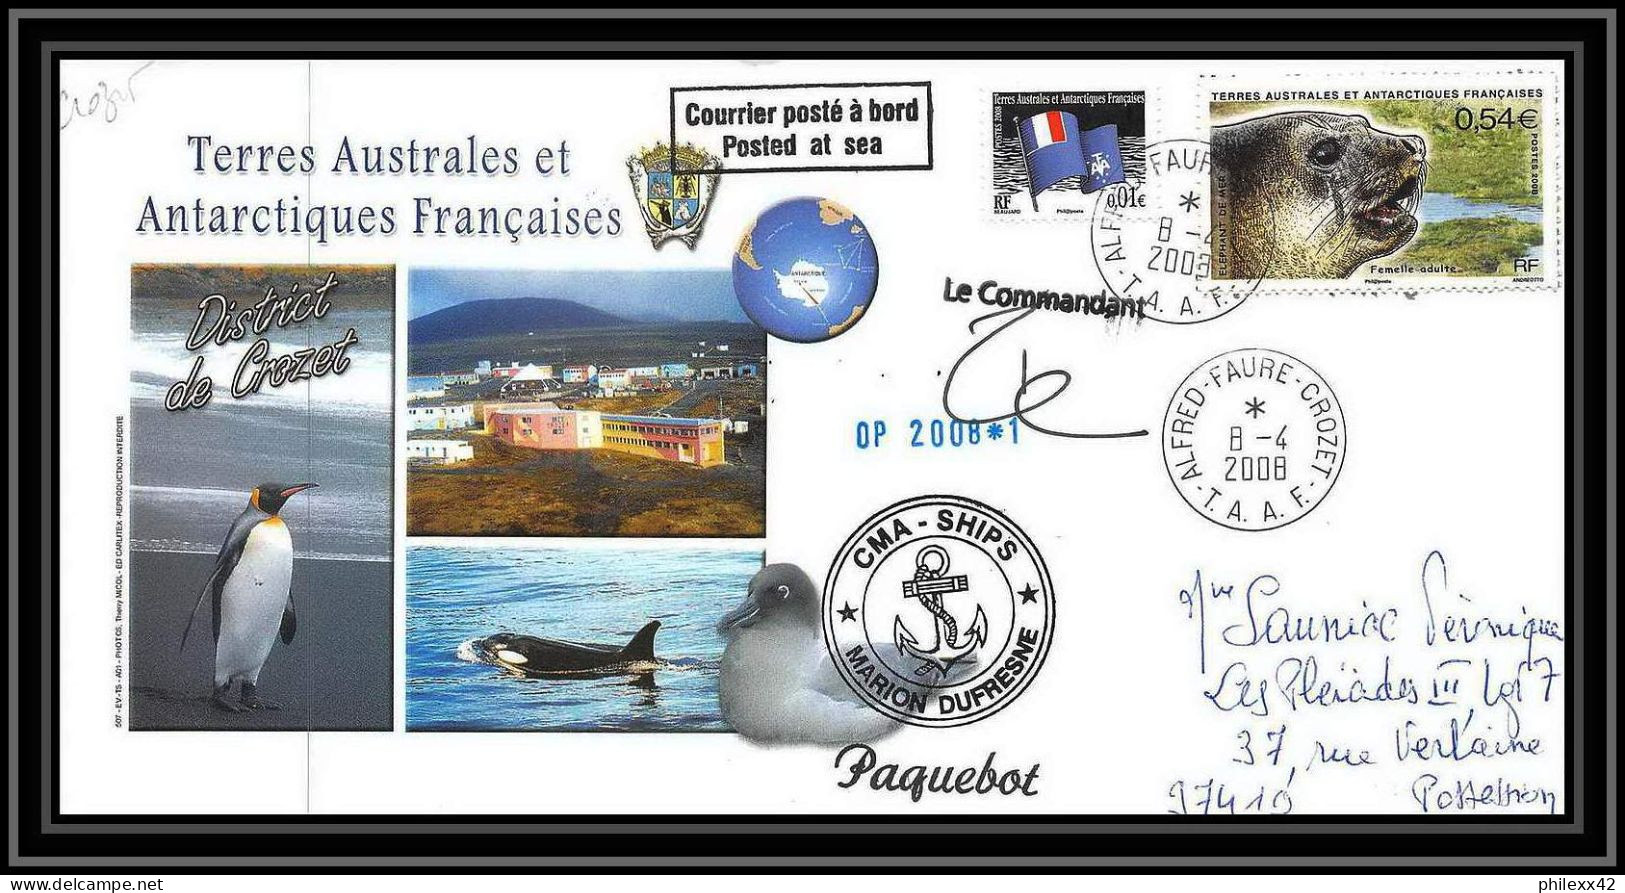 2778 Helilagon Terres Australes TAAF Lettre Cover Dufresne 2 Signé Signed Op 2008/1 Crozet N°508 8/4/2008 Sea Elephant - Hélicoptères